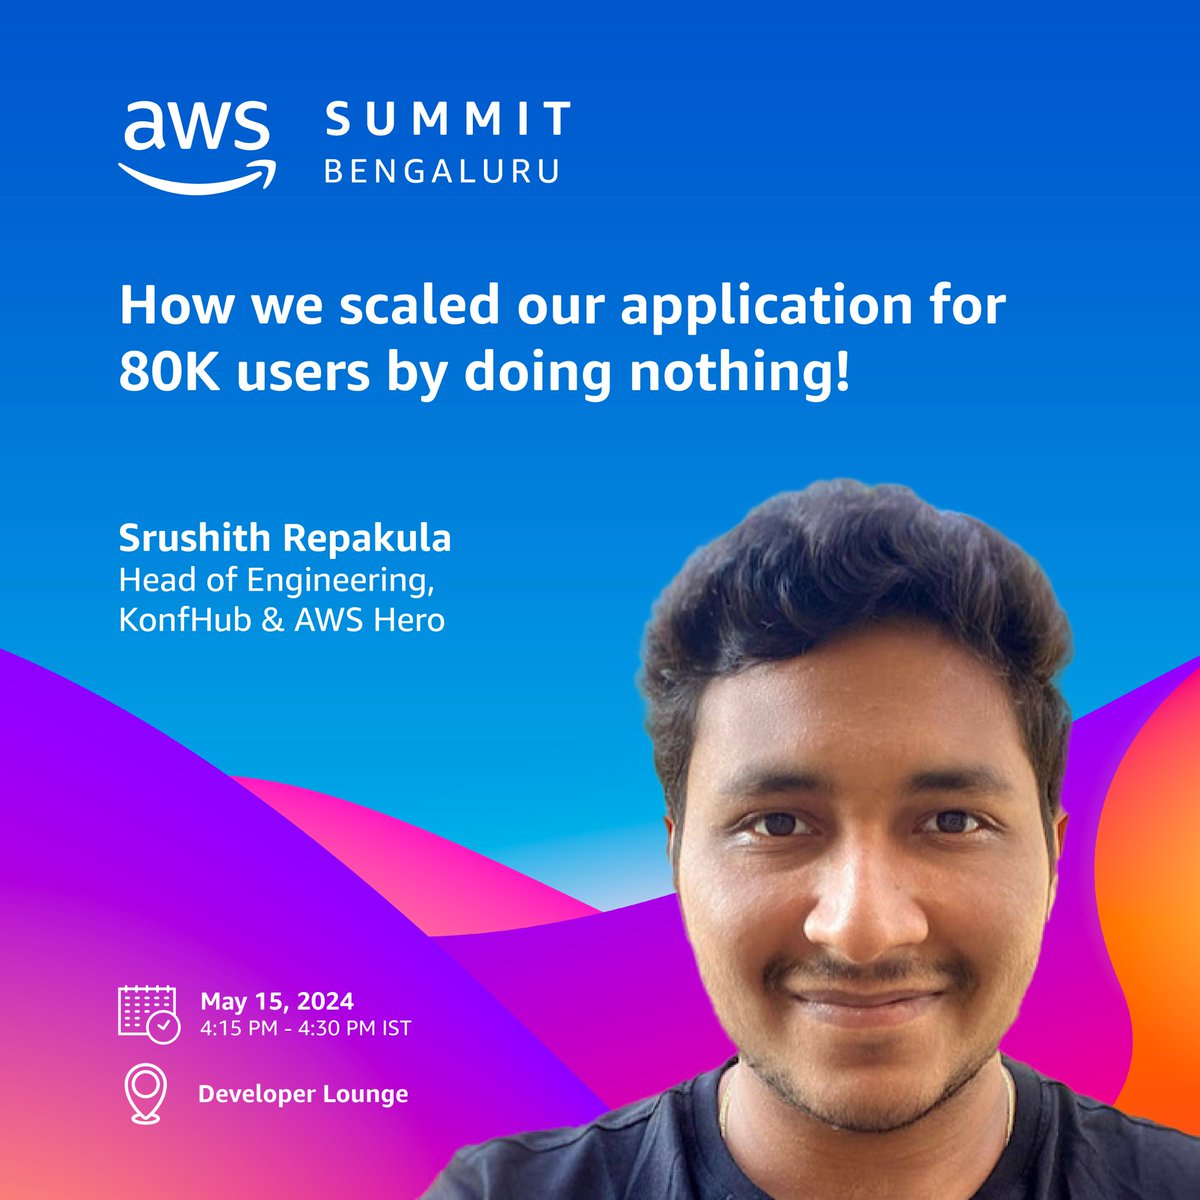 AWS Summit is coming to Bengaluru for the first time, and I am super excited to be presenting at the developer lounge. I will be talking about how our application scaled to 80K users and we (almost) did nothing! aws.amazon.com/events/summits… #awssummitbengaluru